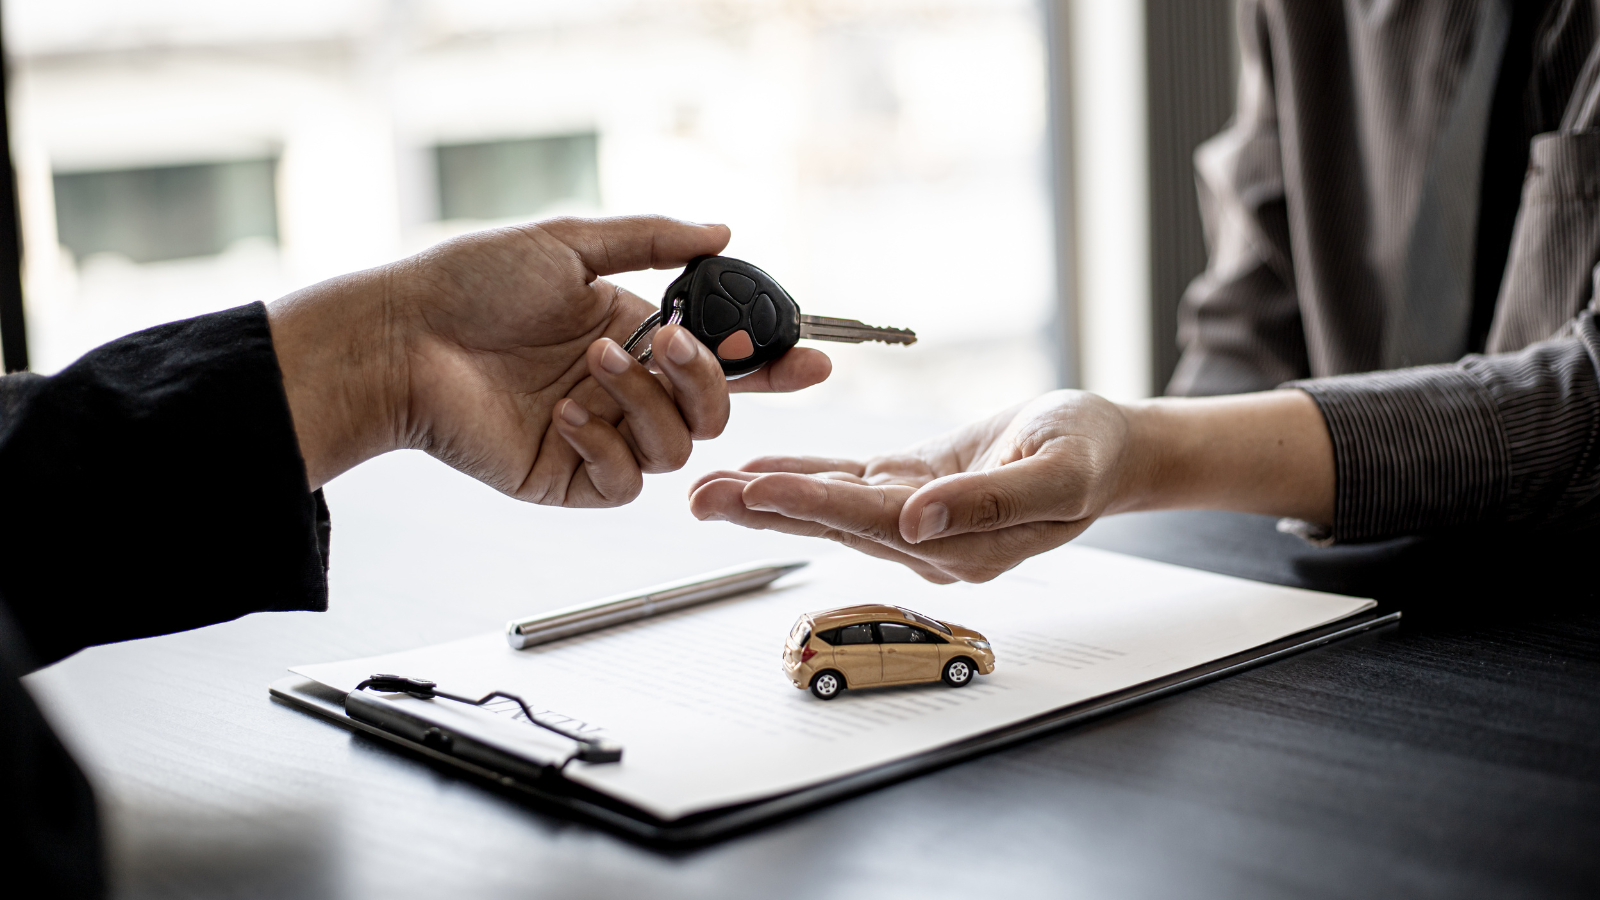 Two persons’ hands exchanging car keys over clipboard bearing a paper, a miniature car model, and some paper.